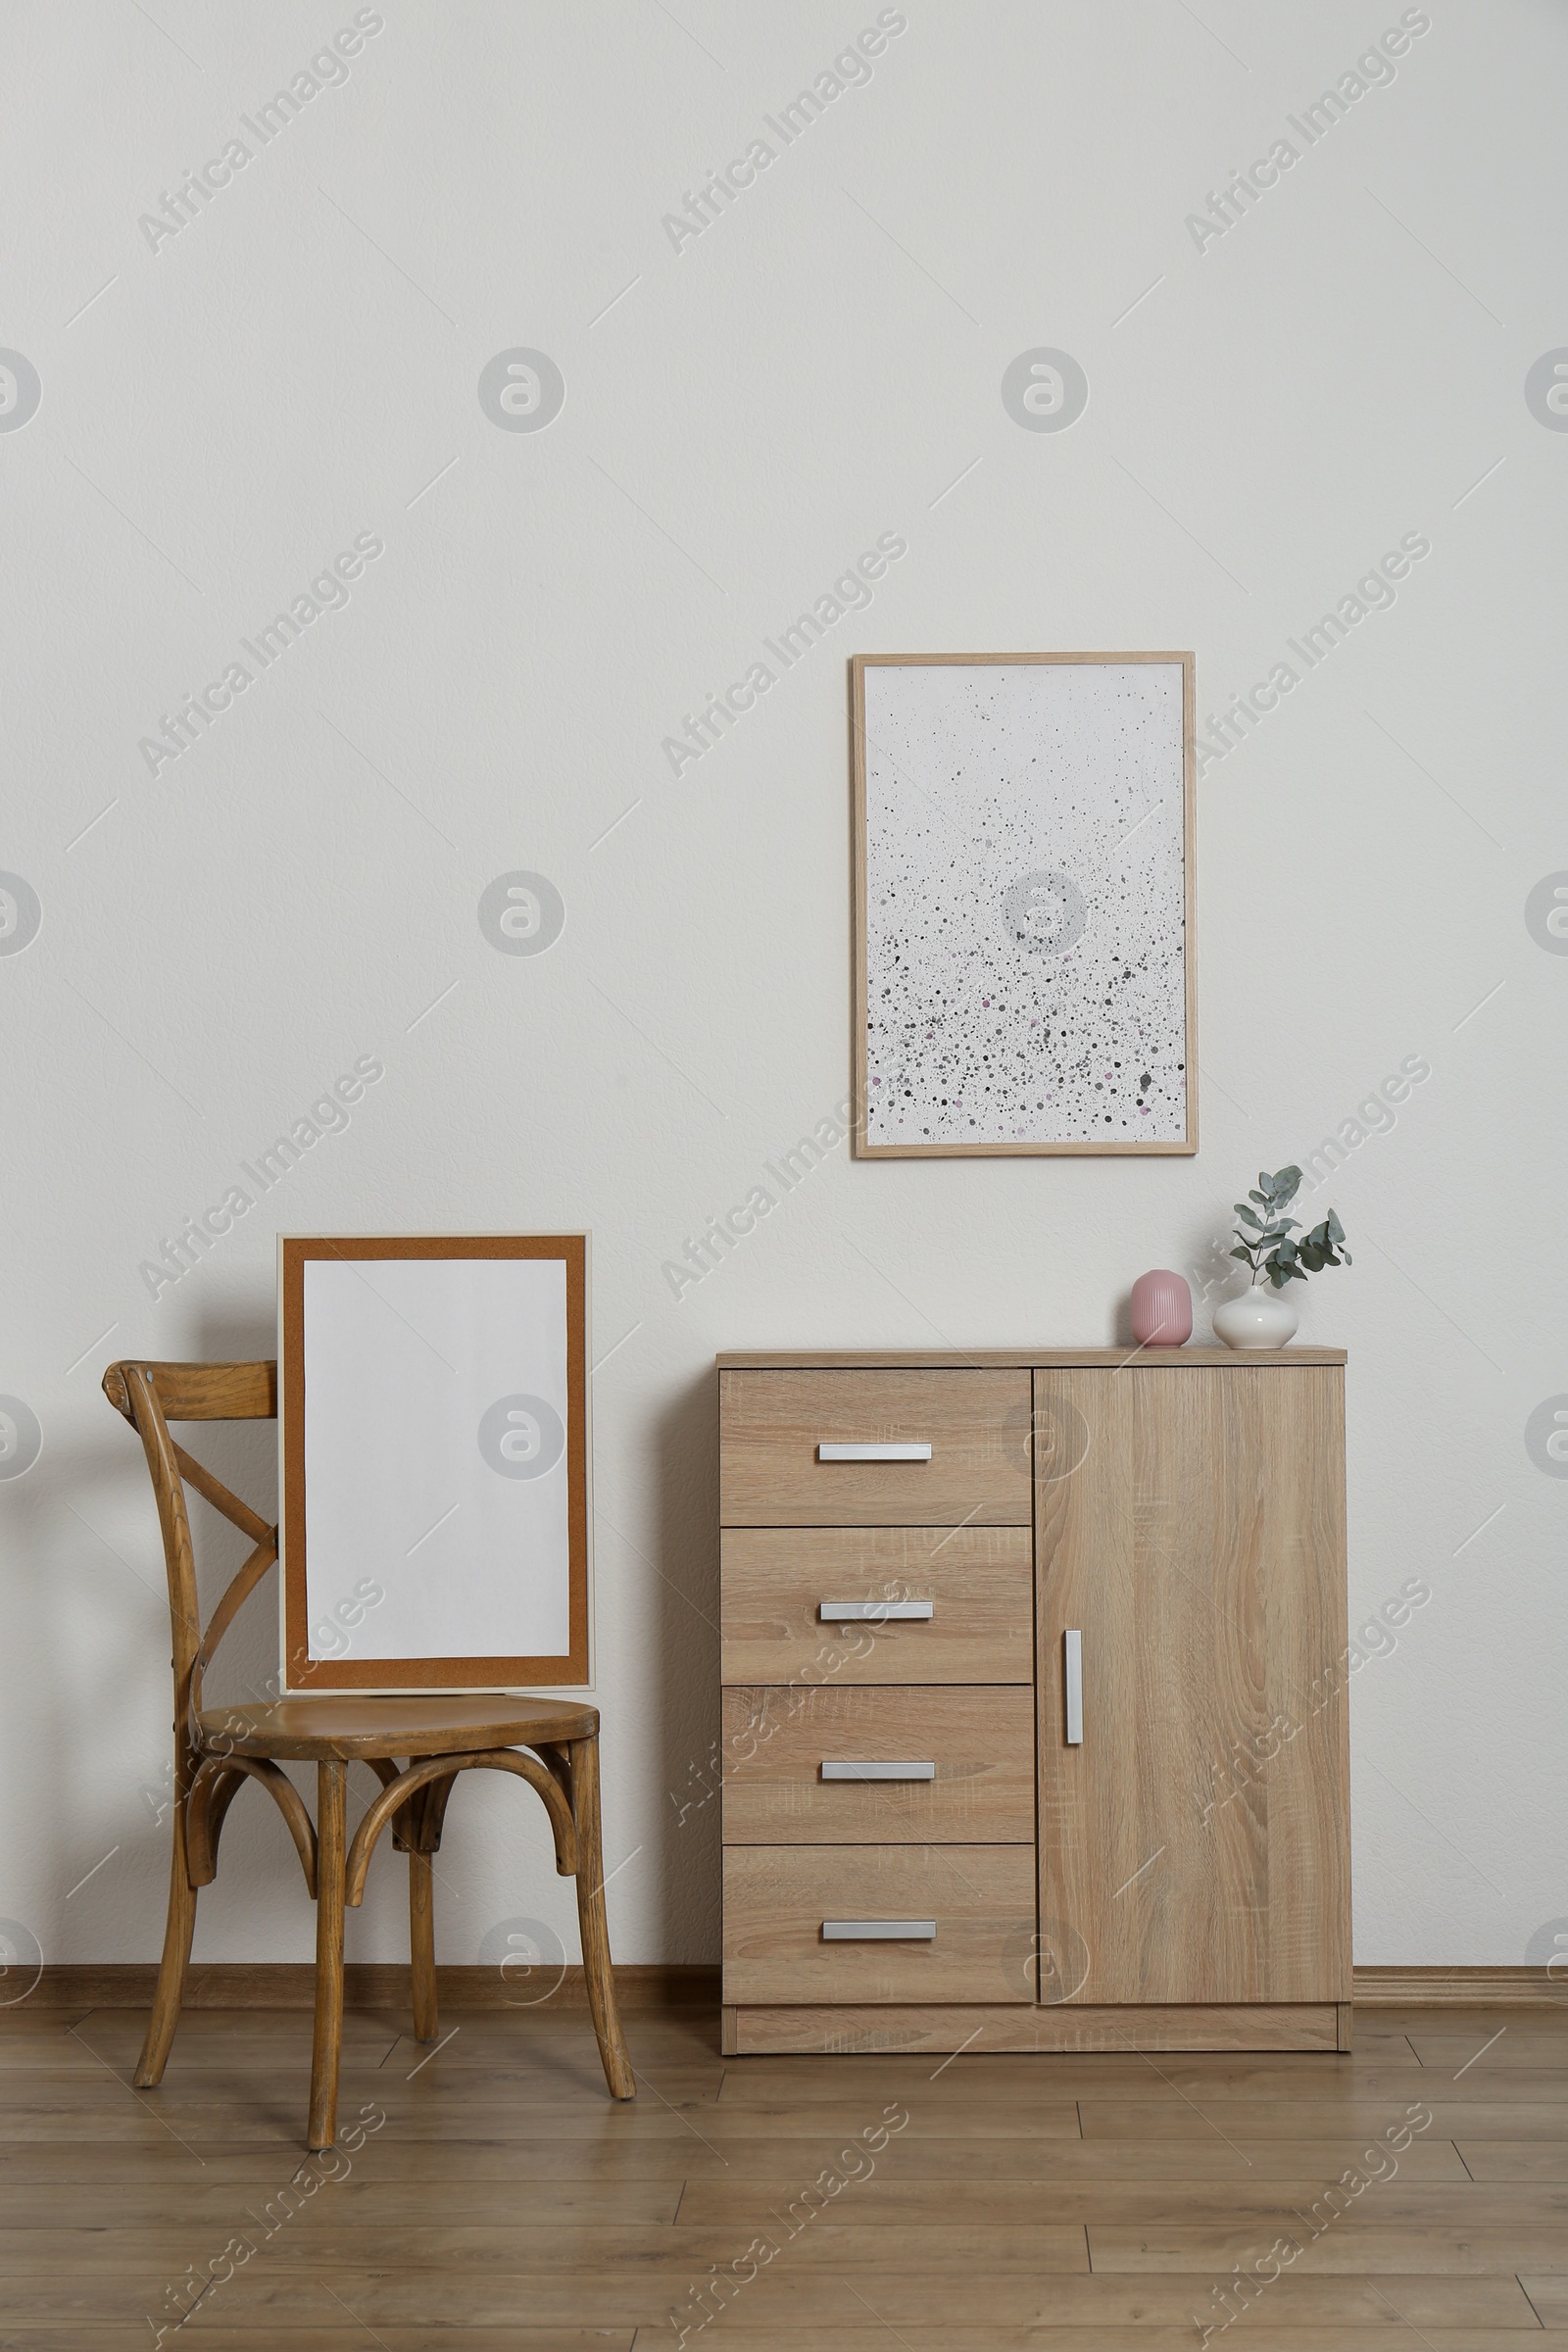 Photo of Wooden chair, chest of drawers, vases and frames in room with light wall. Interior design